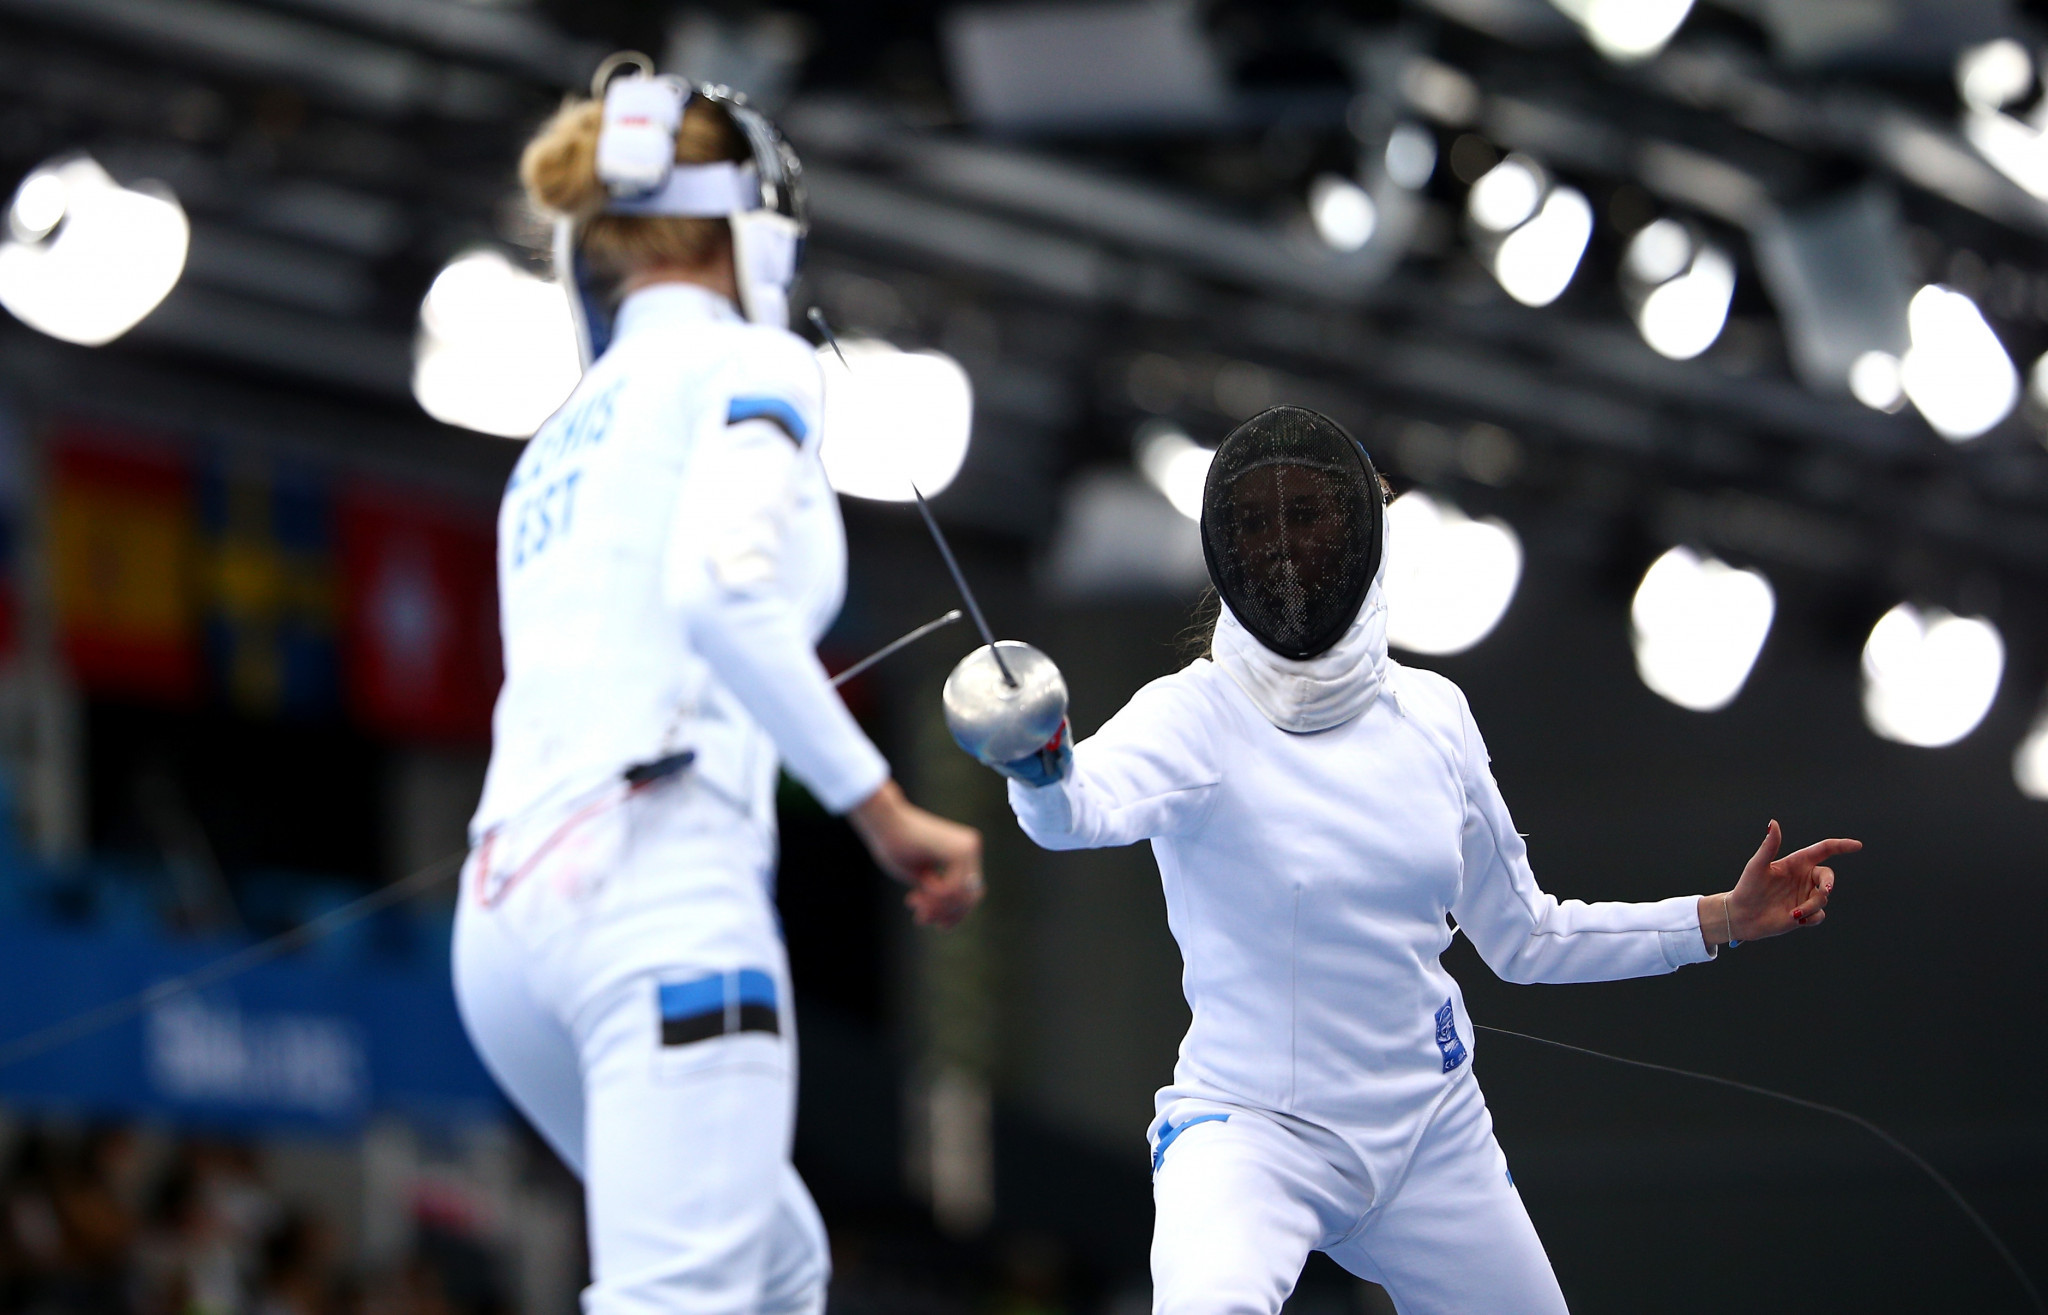 The FIE fencing competition was due to be held in Turku, Finland from September 23 to 24 ©Getty Images